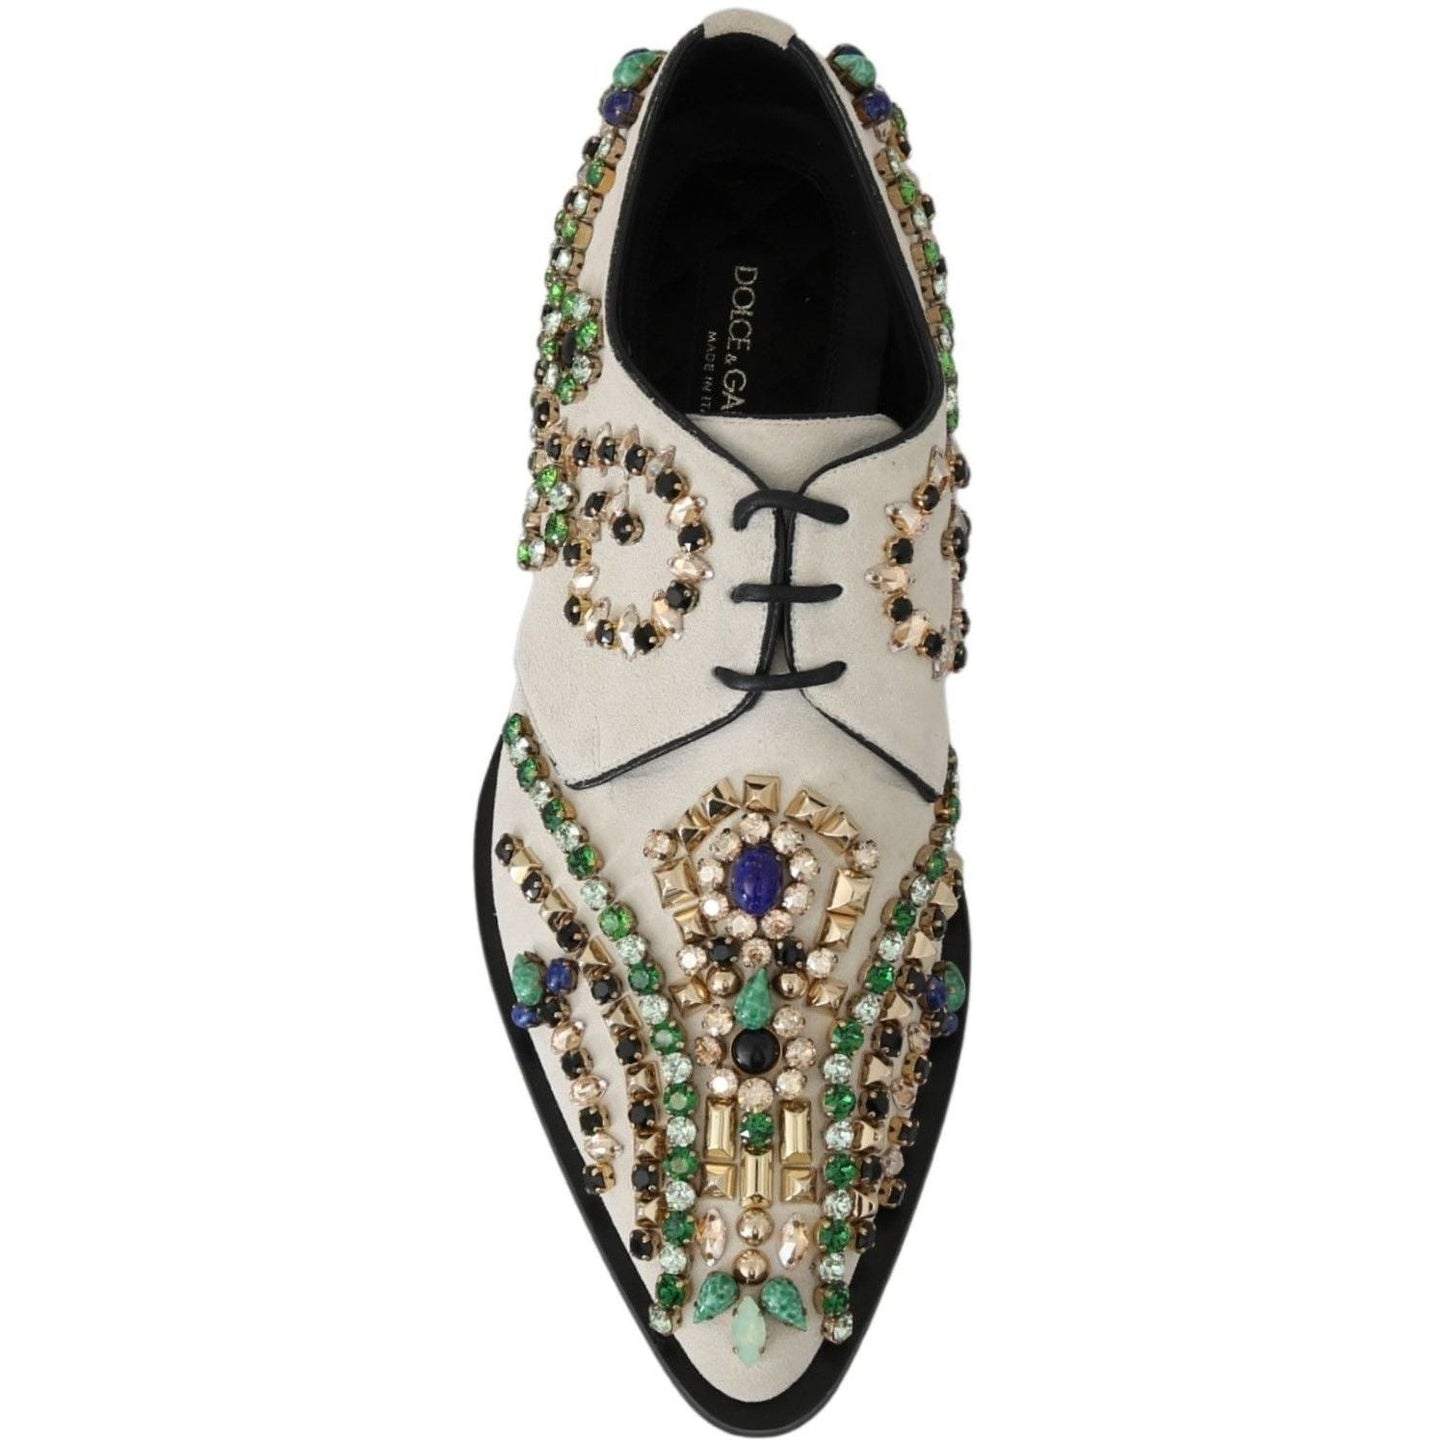 Dolce & Gabbana Elegant White Suede Dress Flats with Crystals white-suede-crystal-dress-broque-shoes